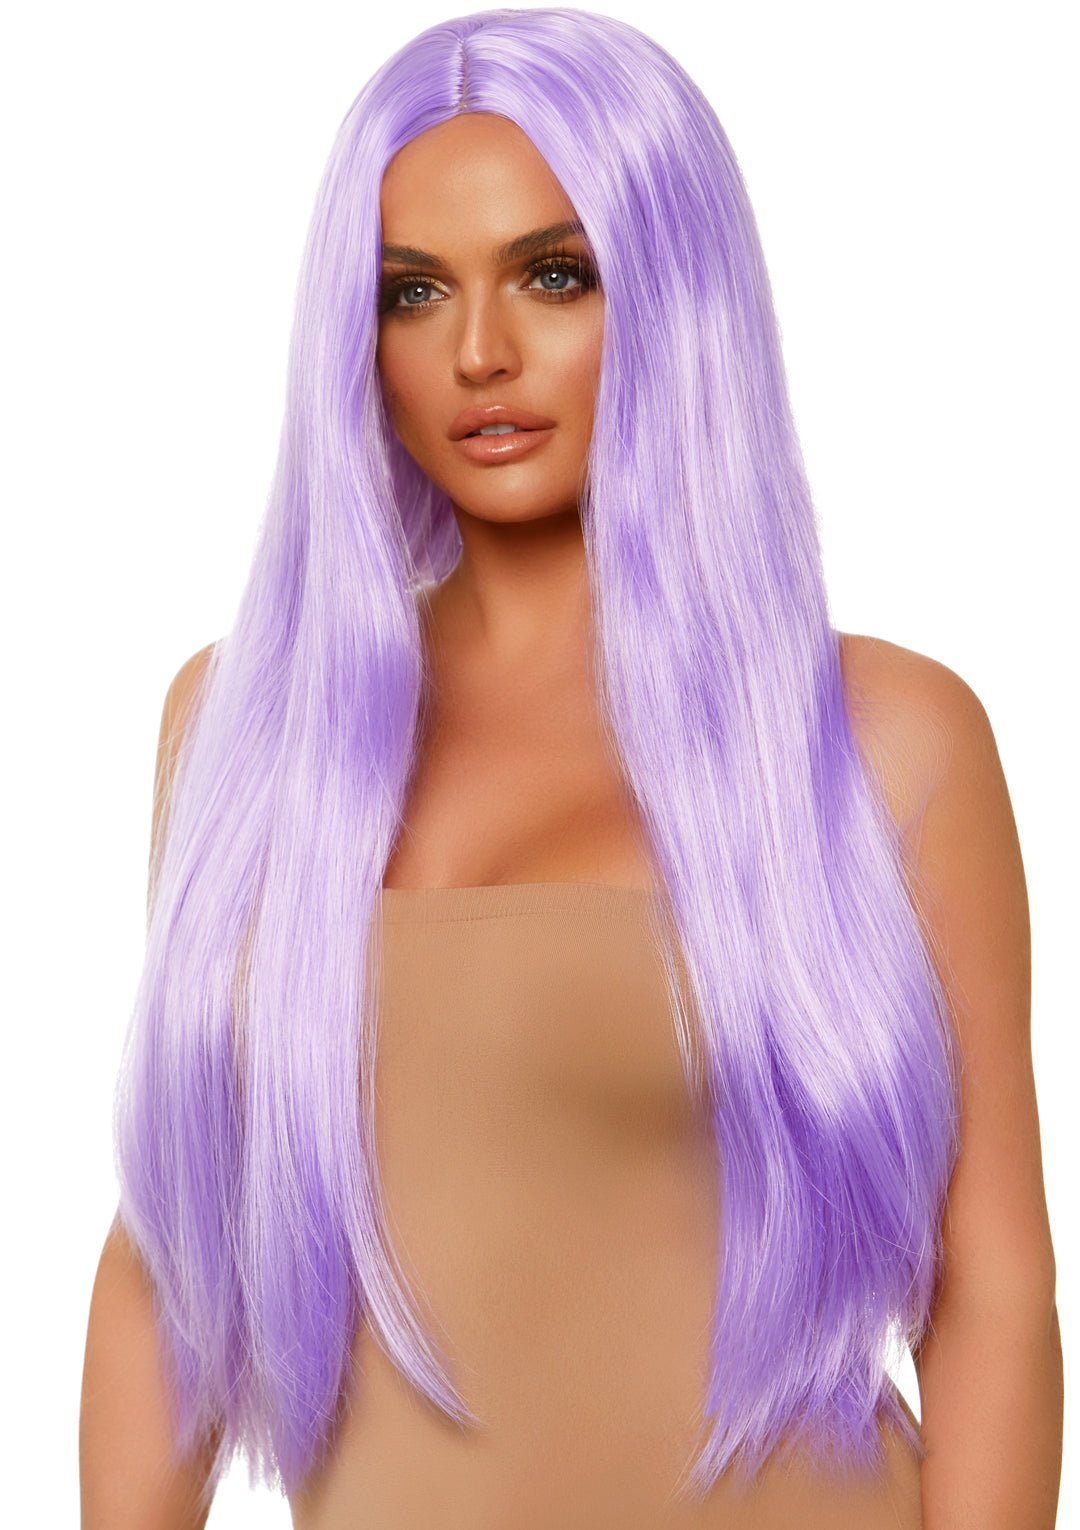 Long Straight Center Part Blacklight Wig - JJ's Party House